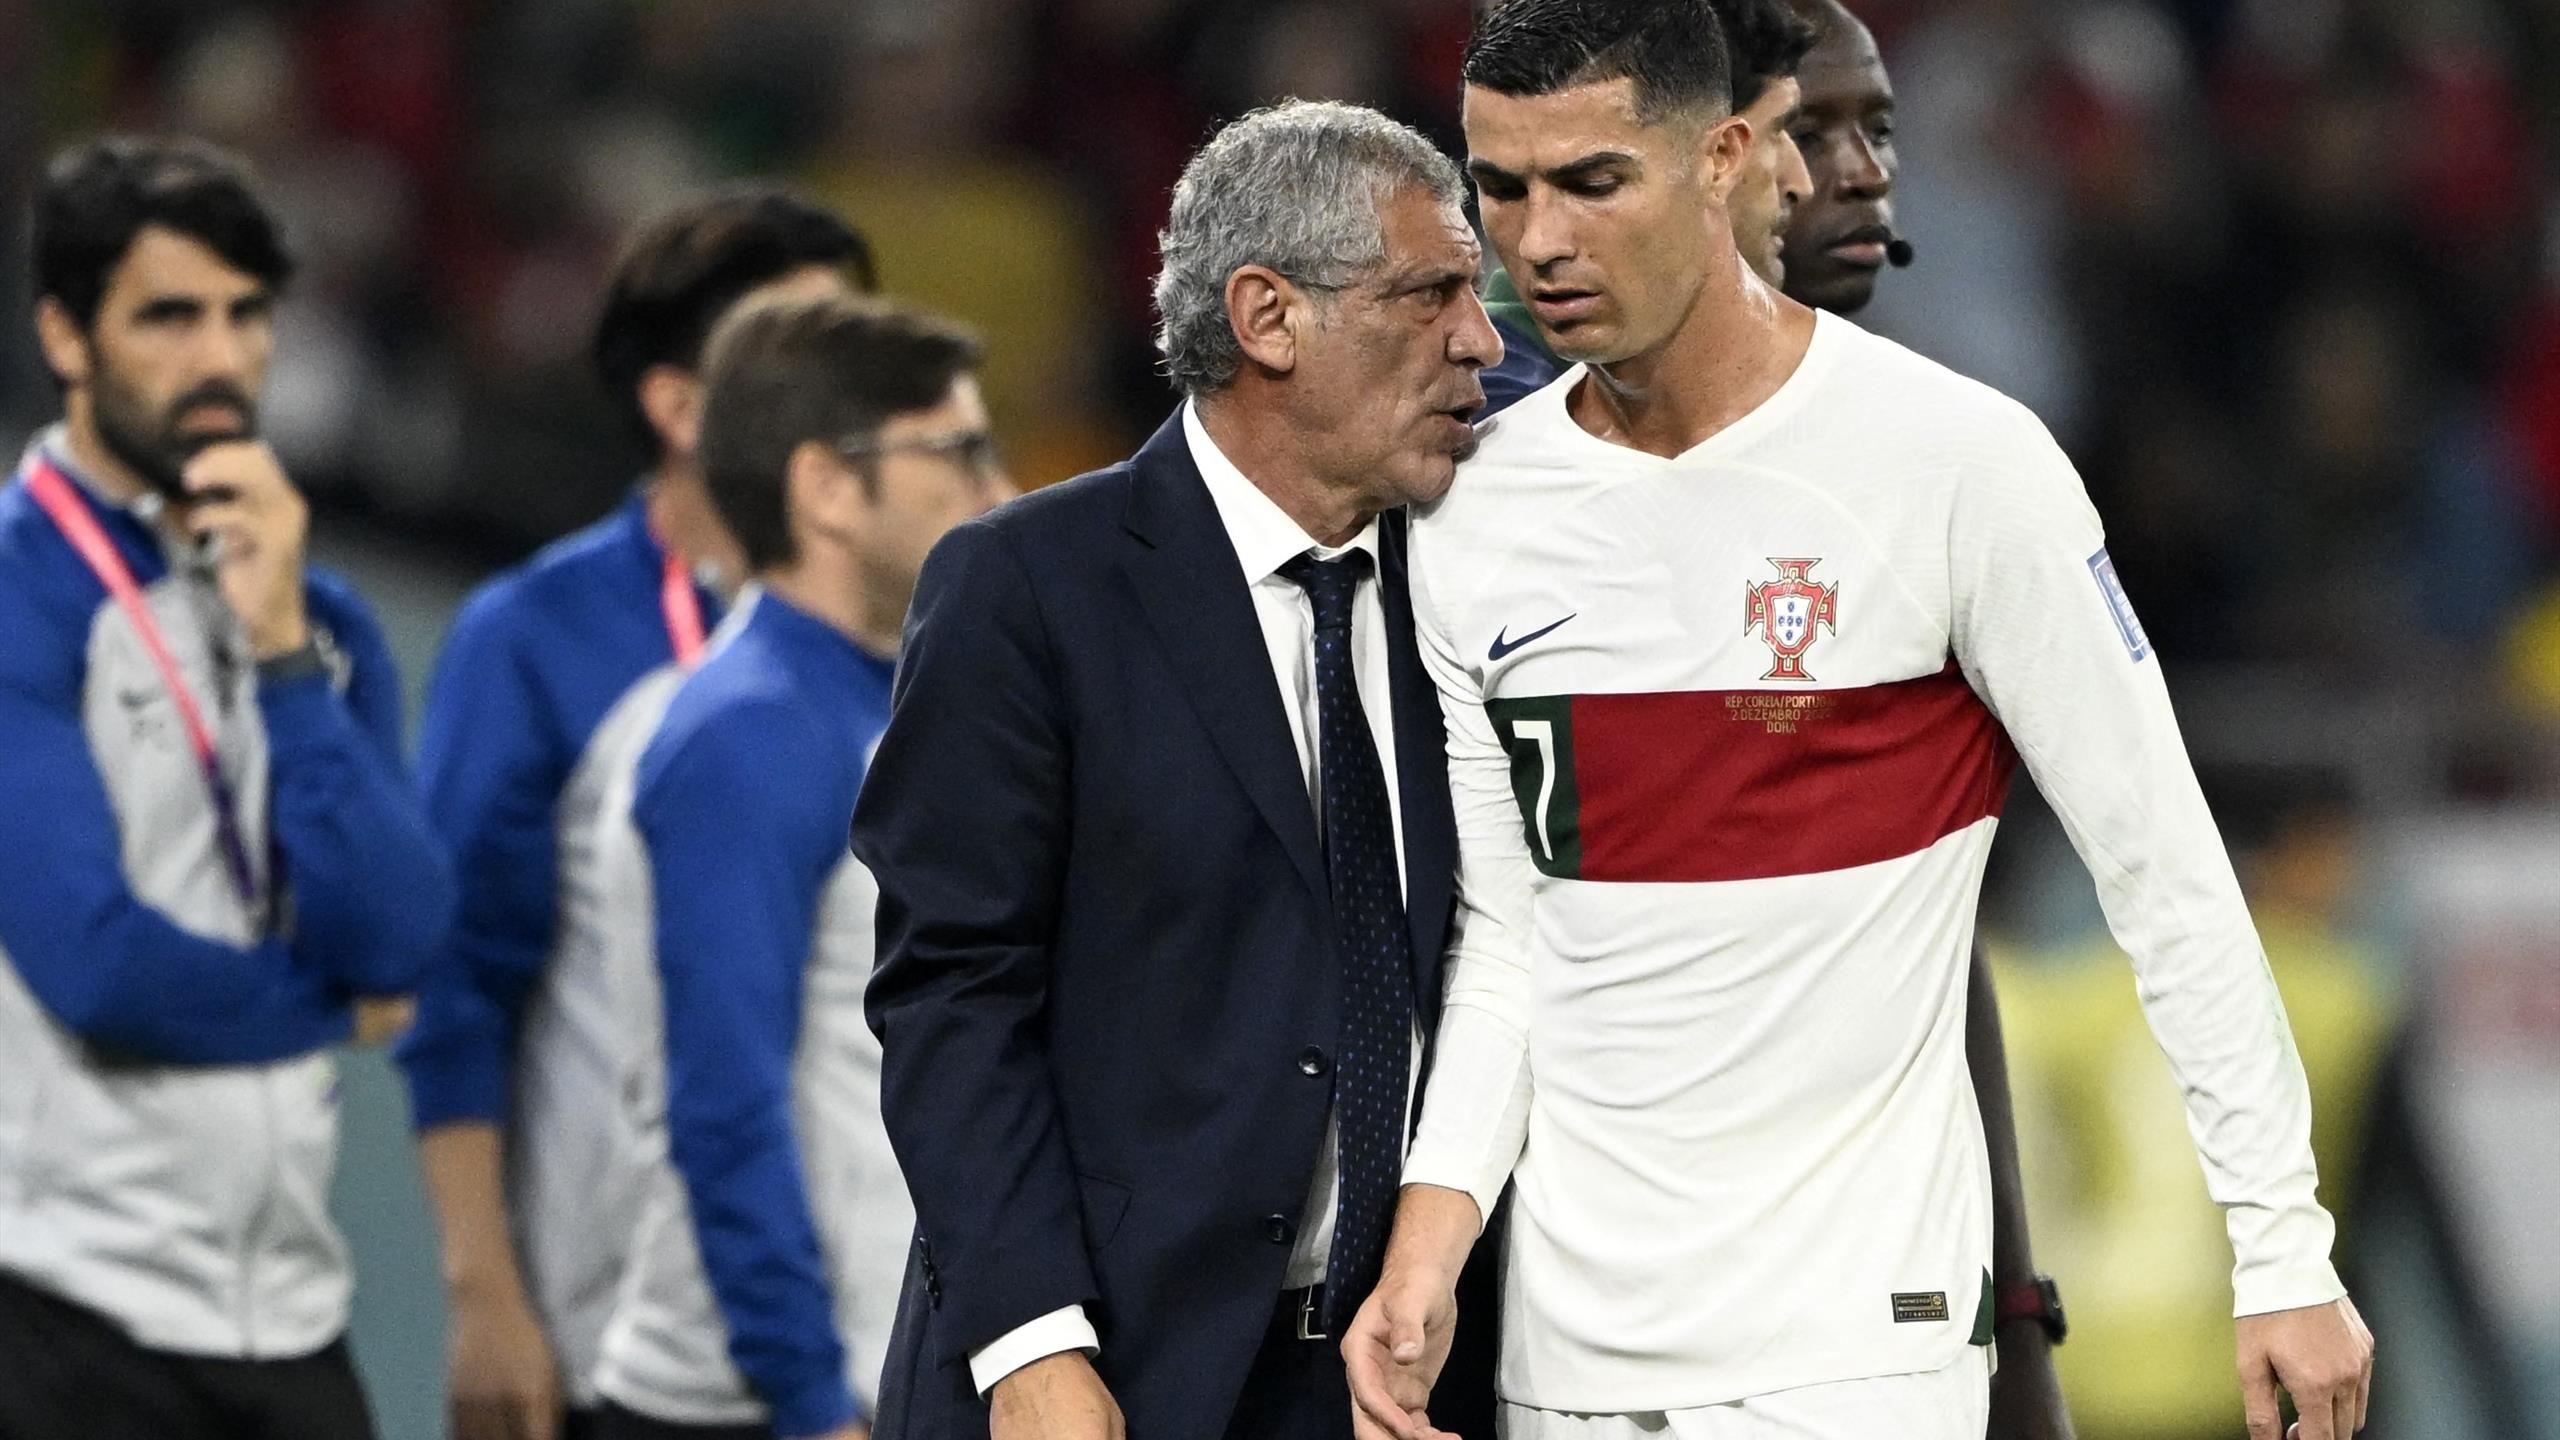 2022 World Cup: You’re Wrong To Have Benched Ronaldo Against Morocco –Figo Tells Santos